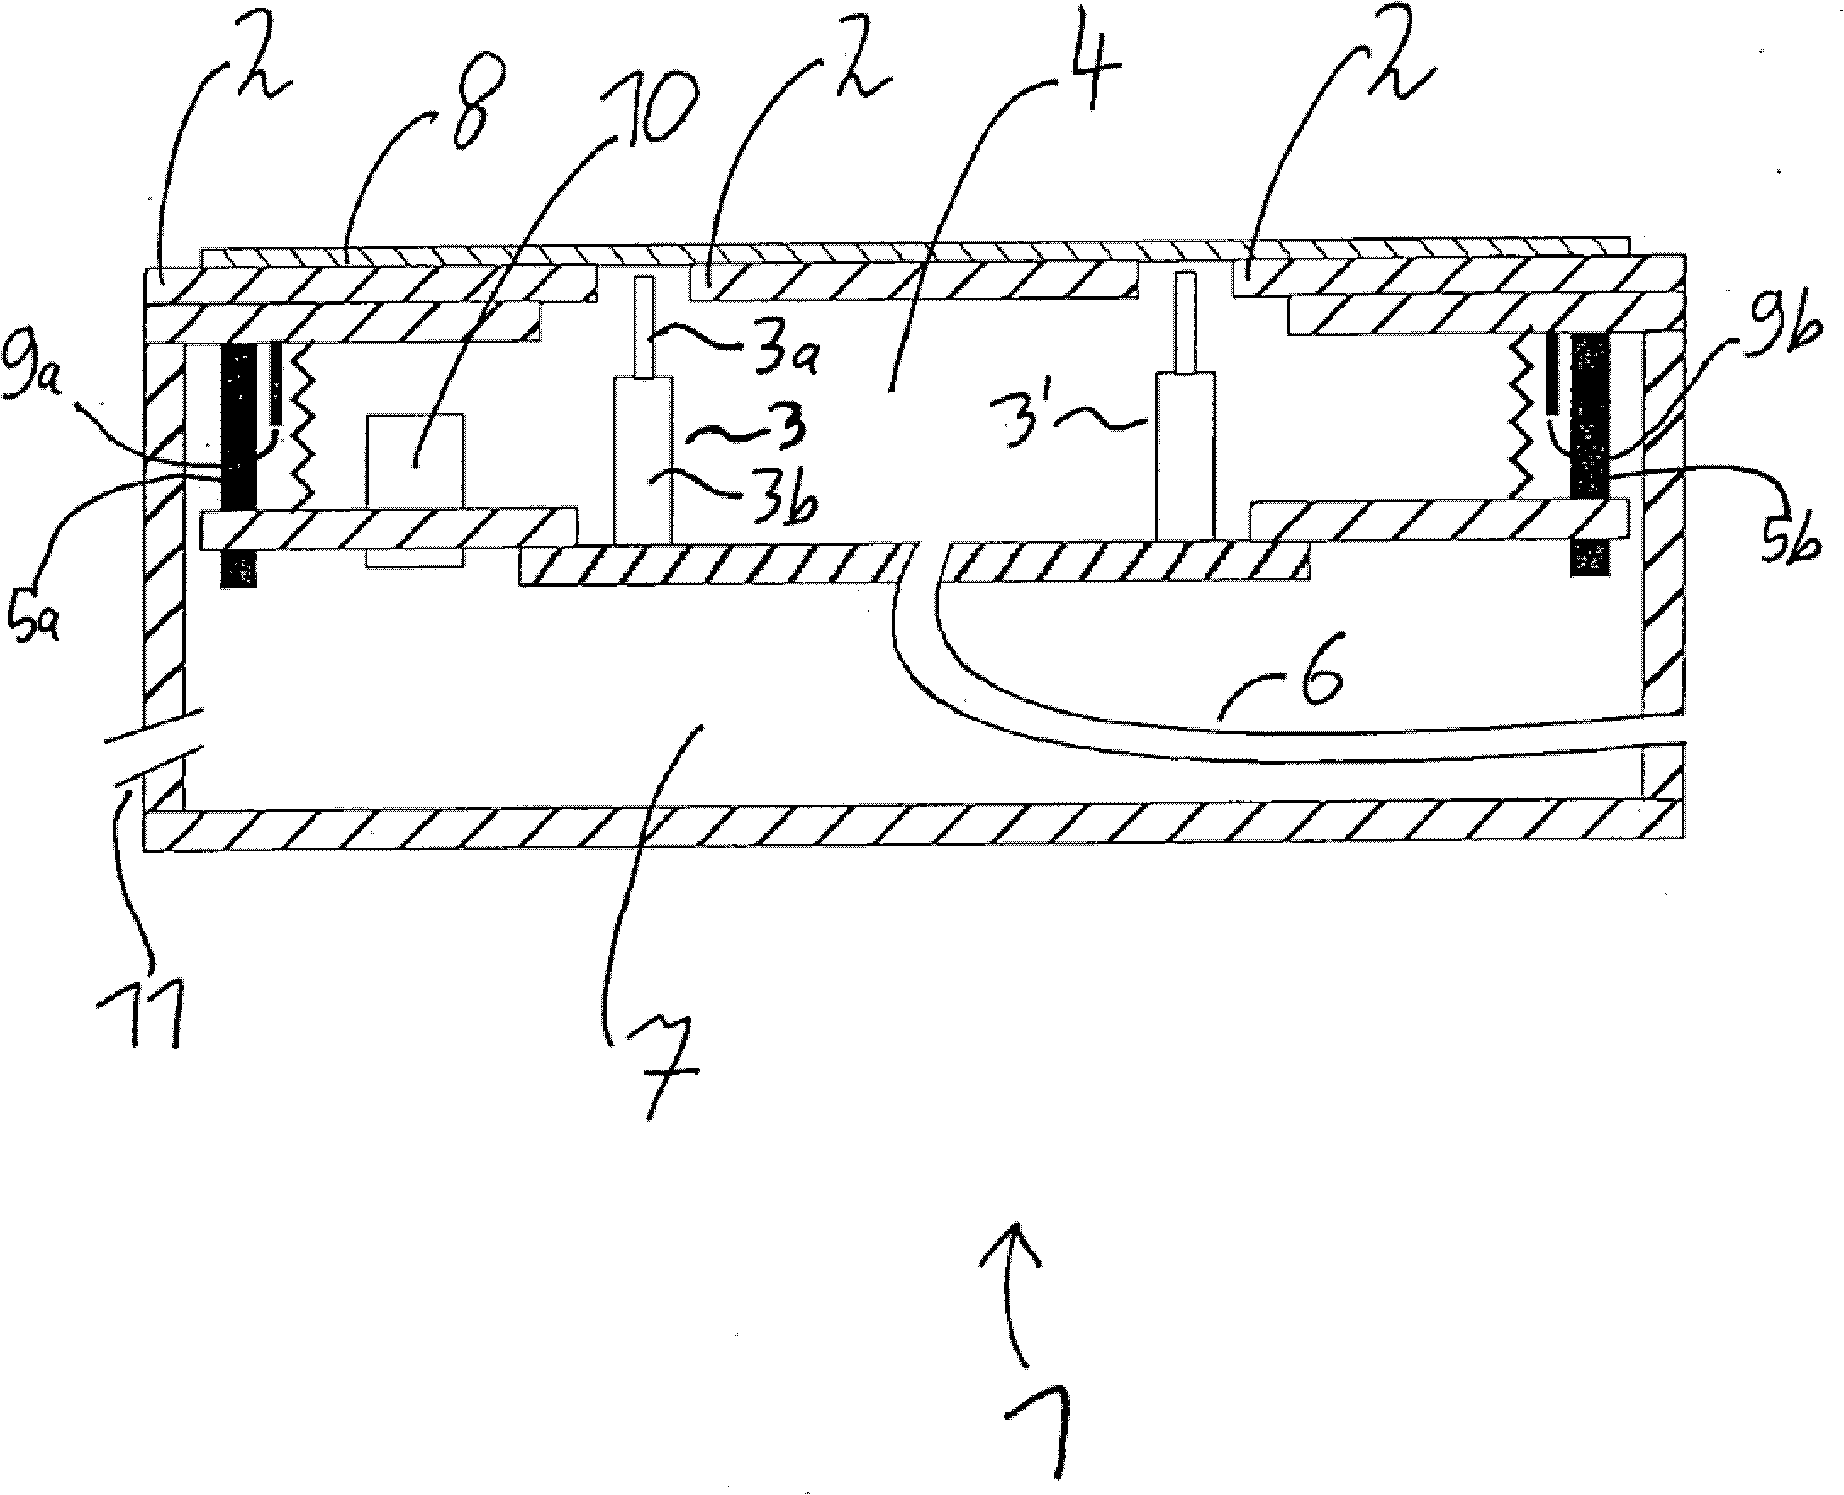 Measuring device for electrically measuring a flat measurement structure that can be contacted on one side